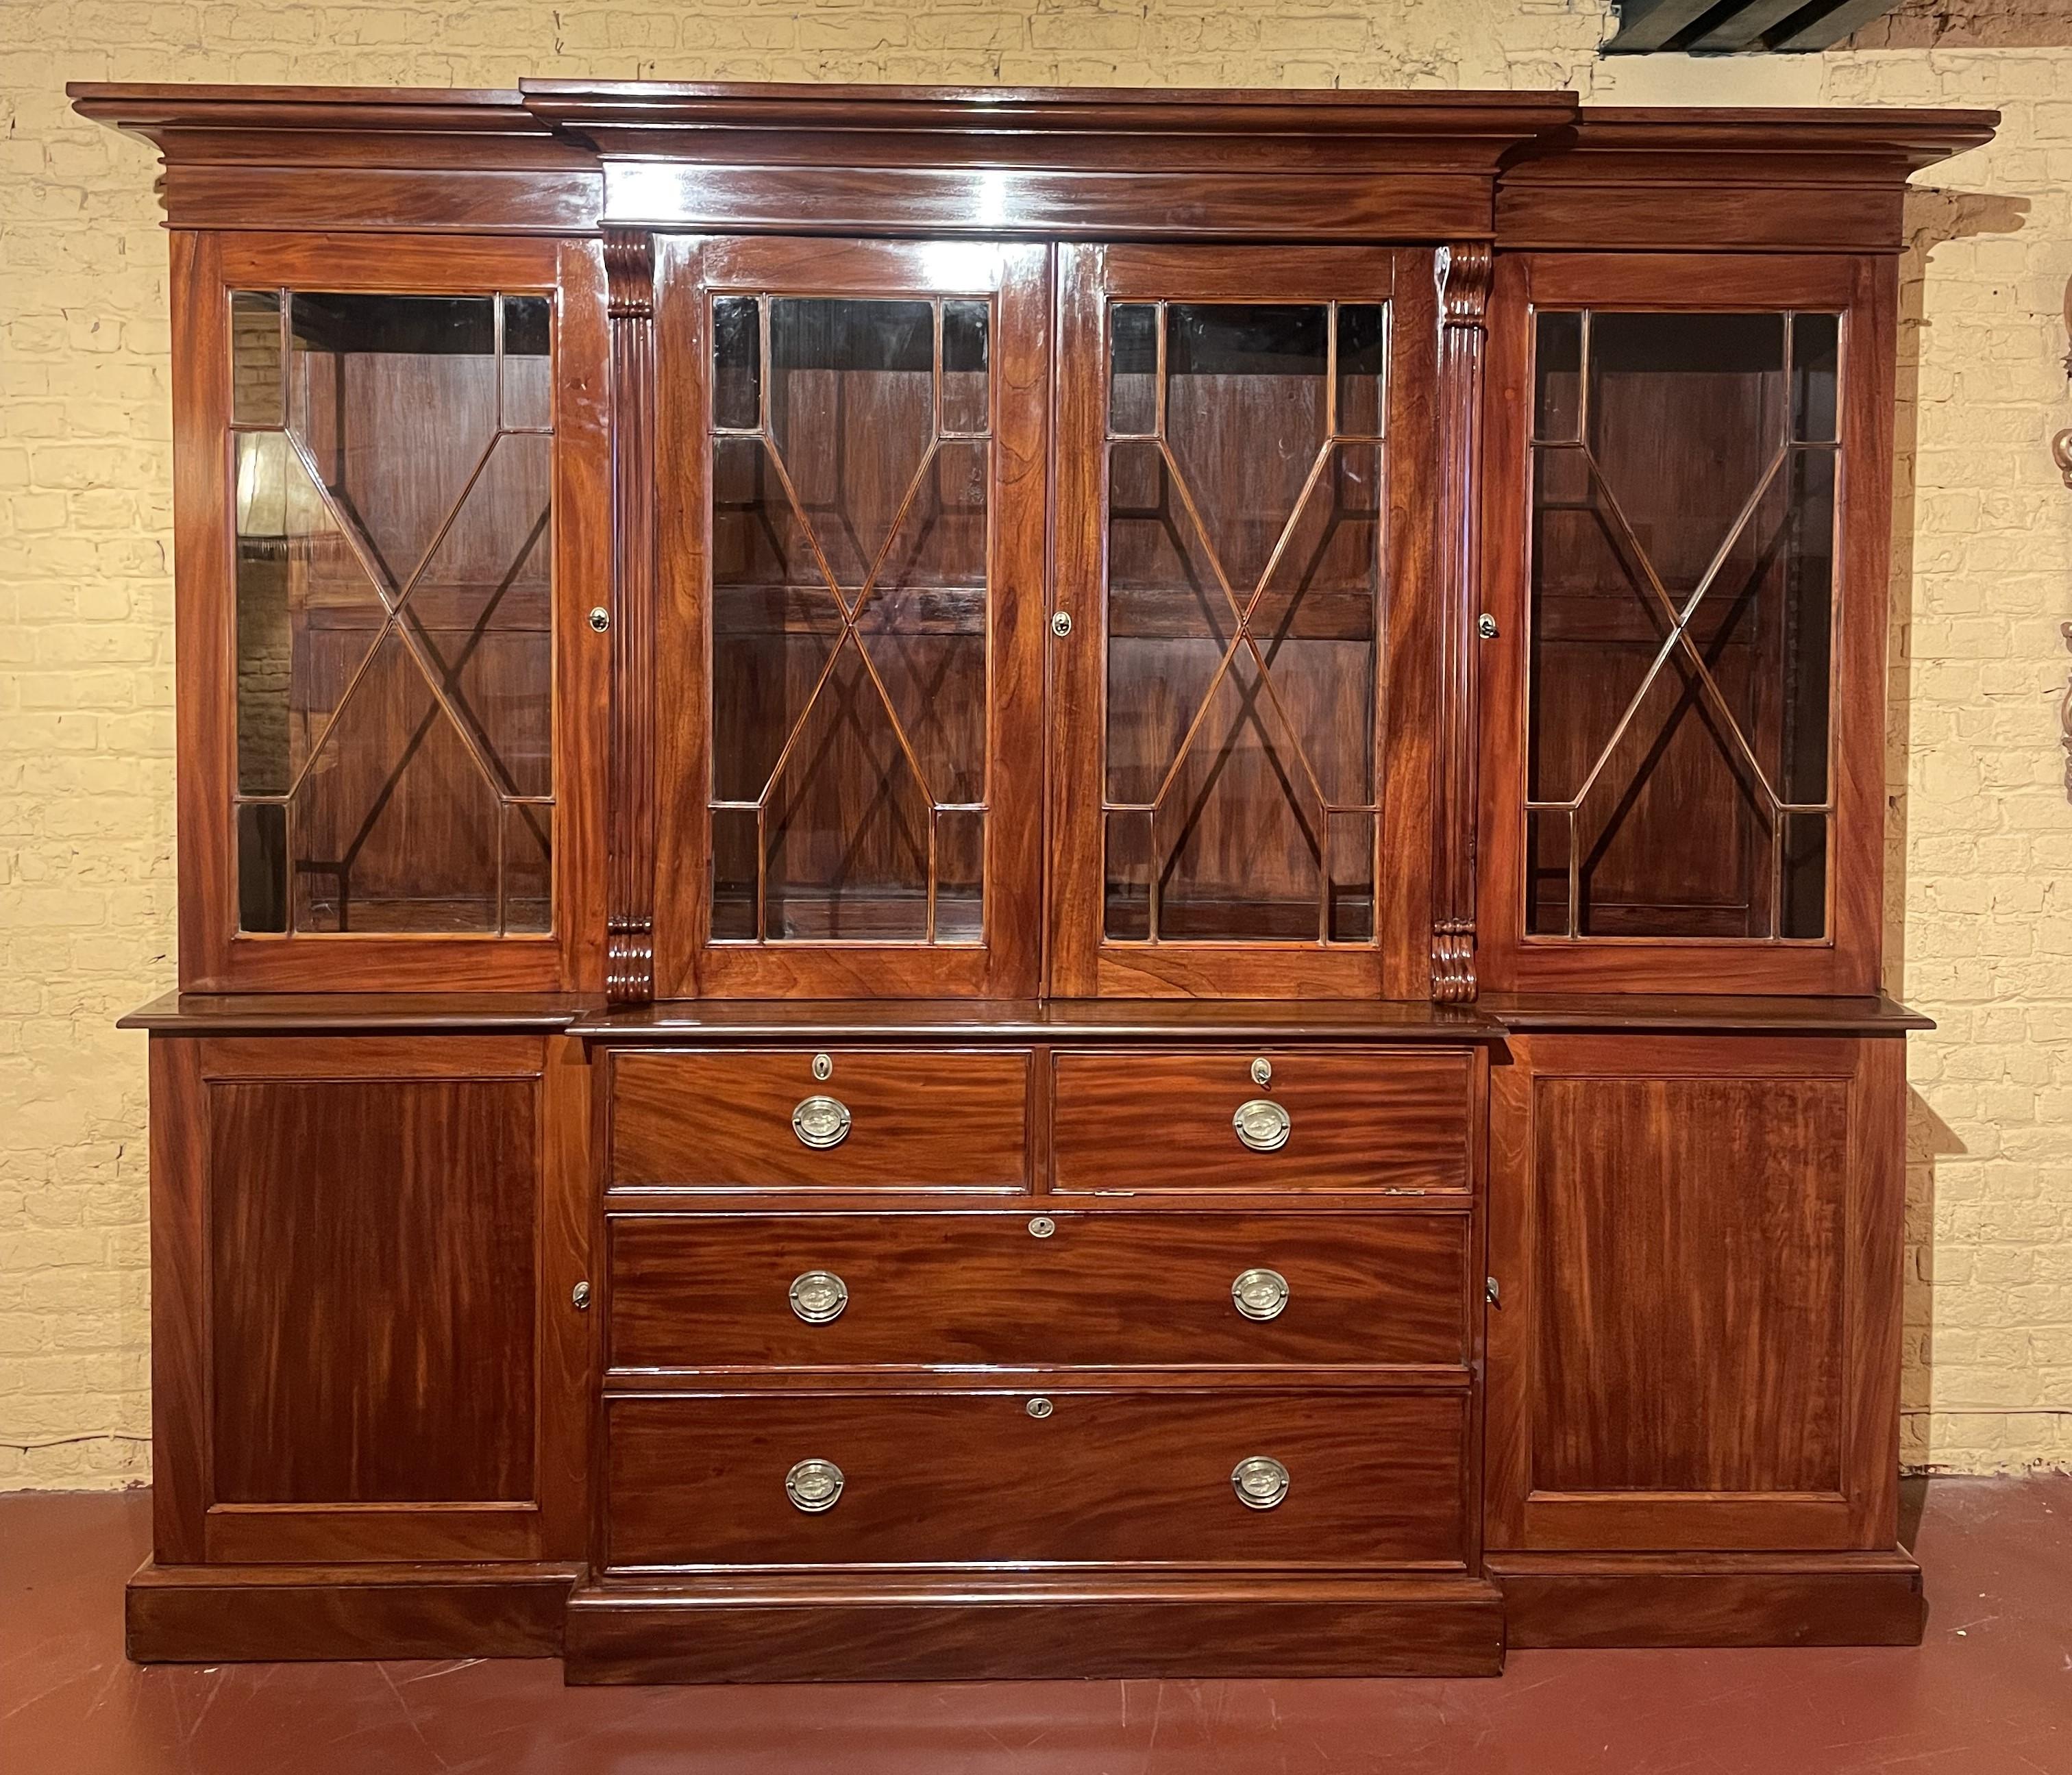 Elegant large mahogany bookcase from the 19th century from England

Very beautiful bookcase called breakfront (which has a forward part). Which gives it a nice line.

The lower part is closed and composed of 2 doors and 4 drawers including a false